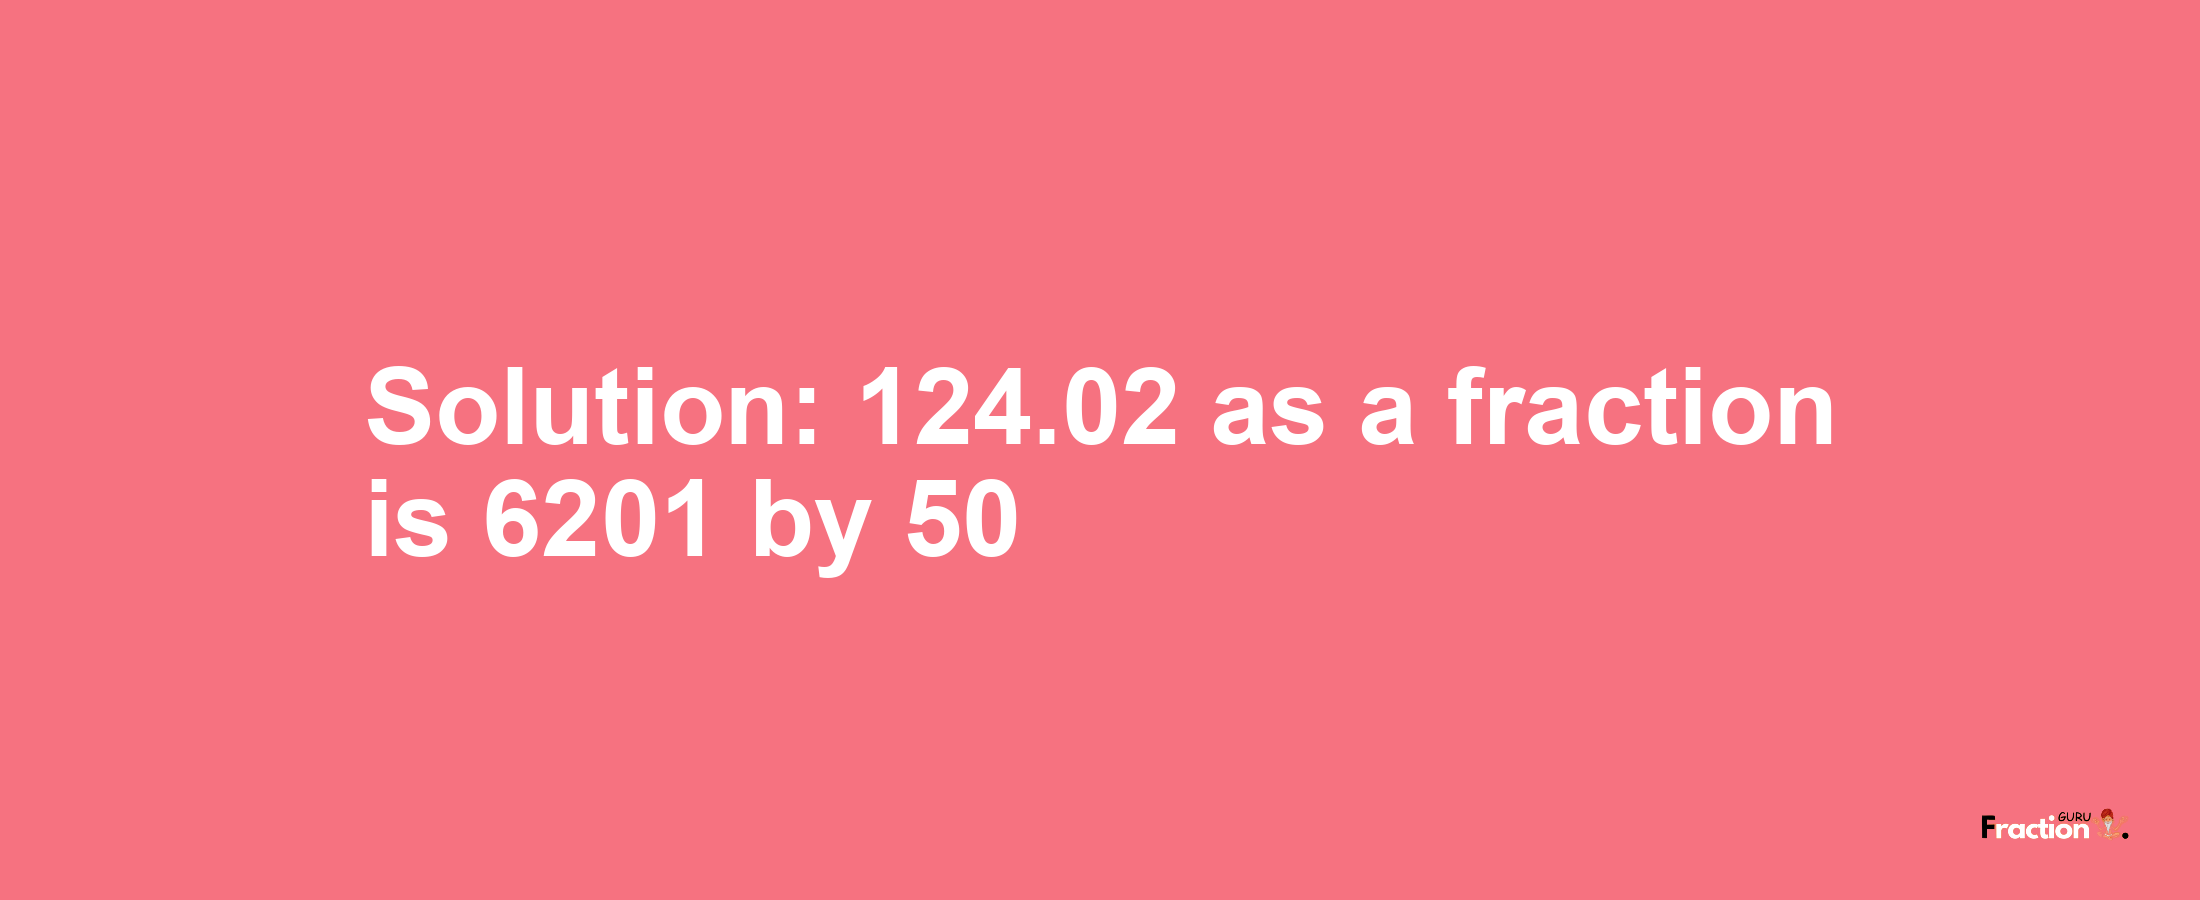 Solution:124.02 as a fraction is 6201/50